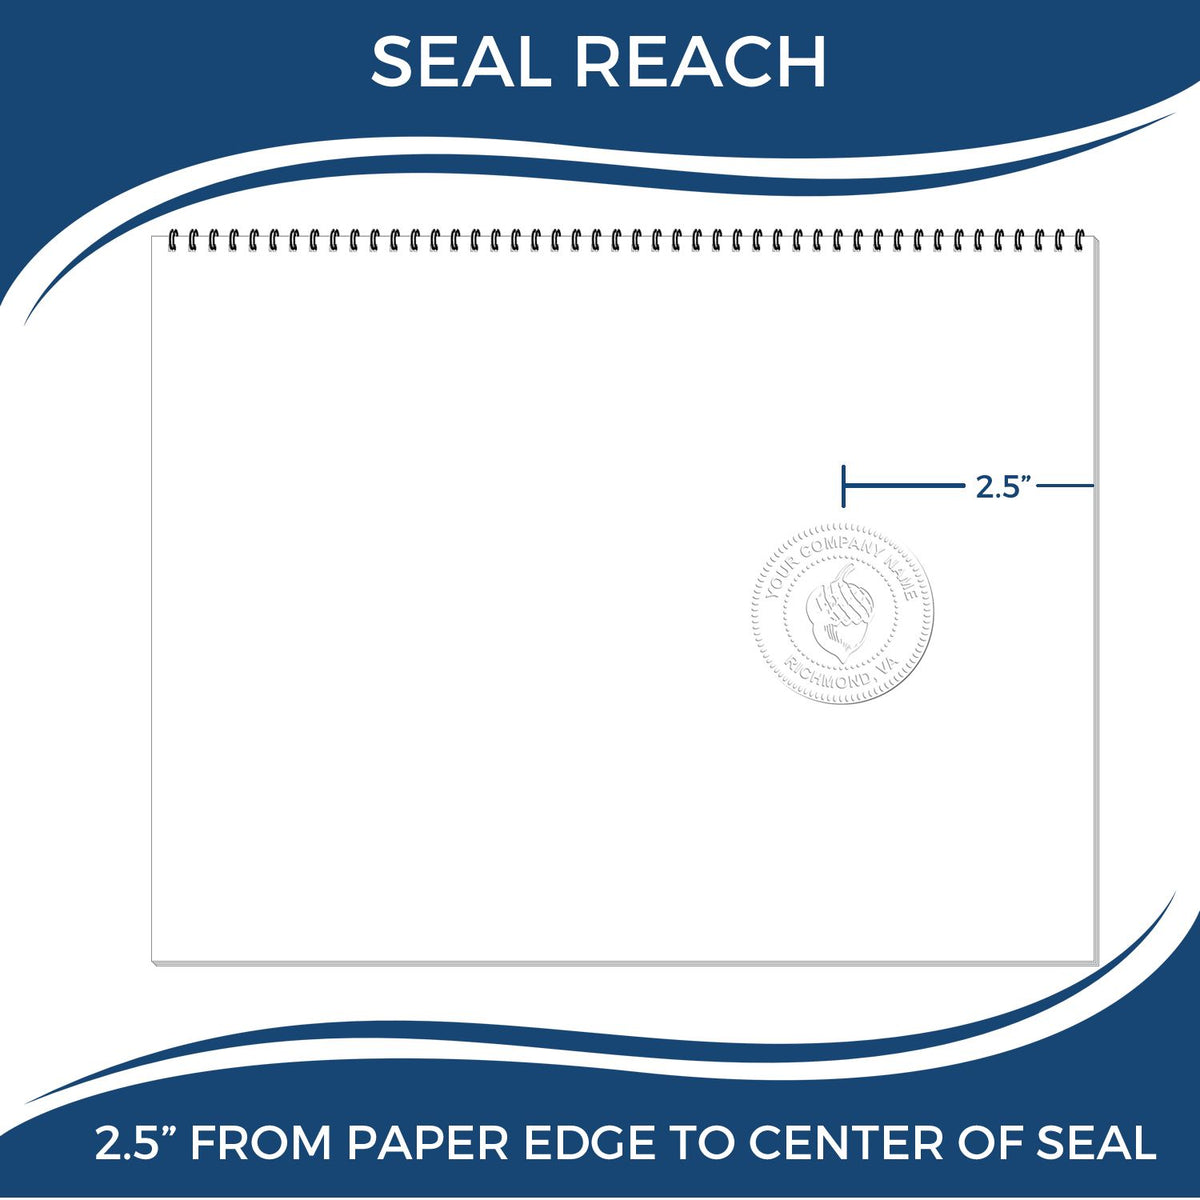 An infographic showing the seal reach which is represented by a ruler and a miniature seal image of the Long Reach Arkansas Land Surveyor Seal